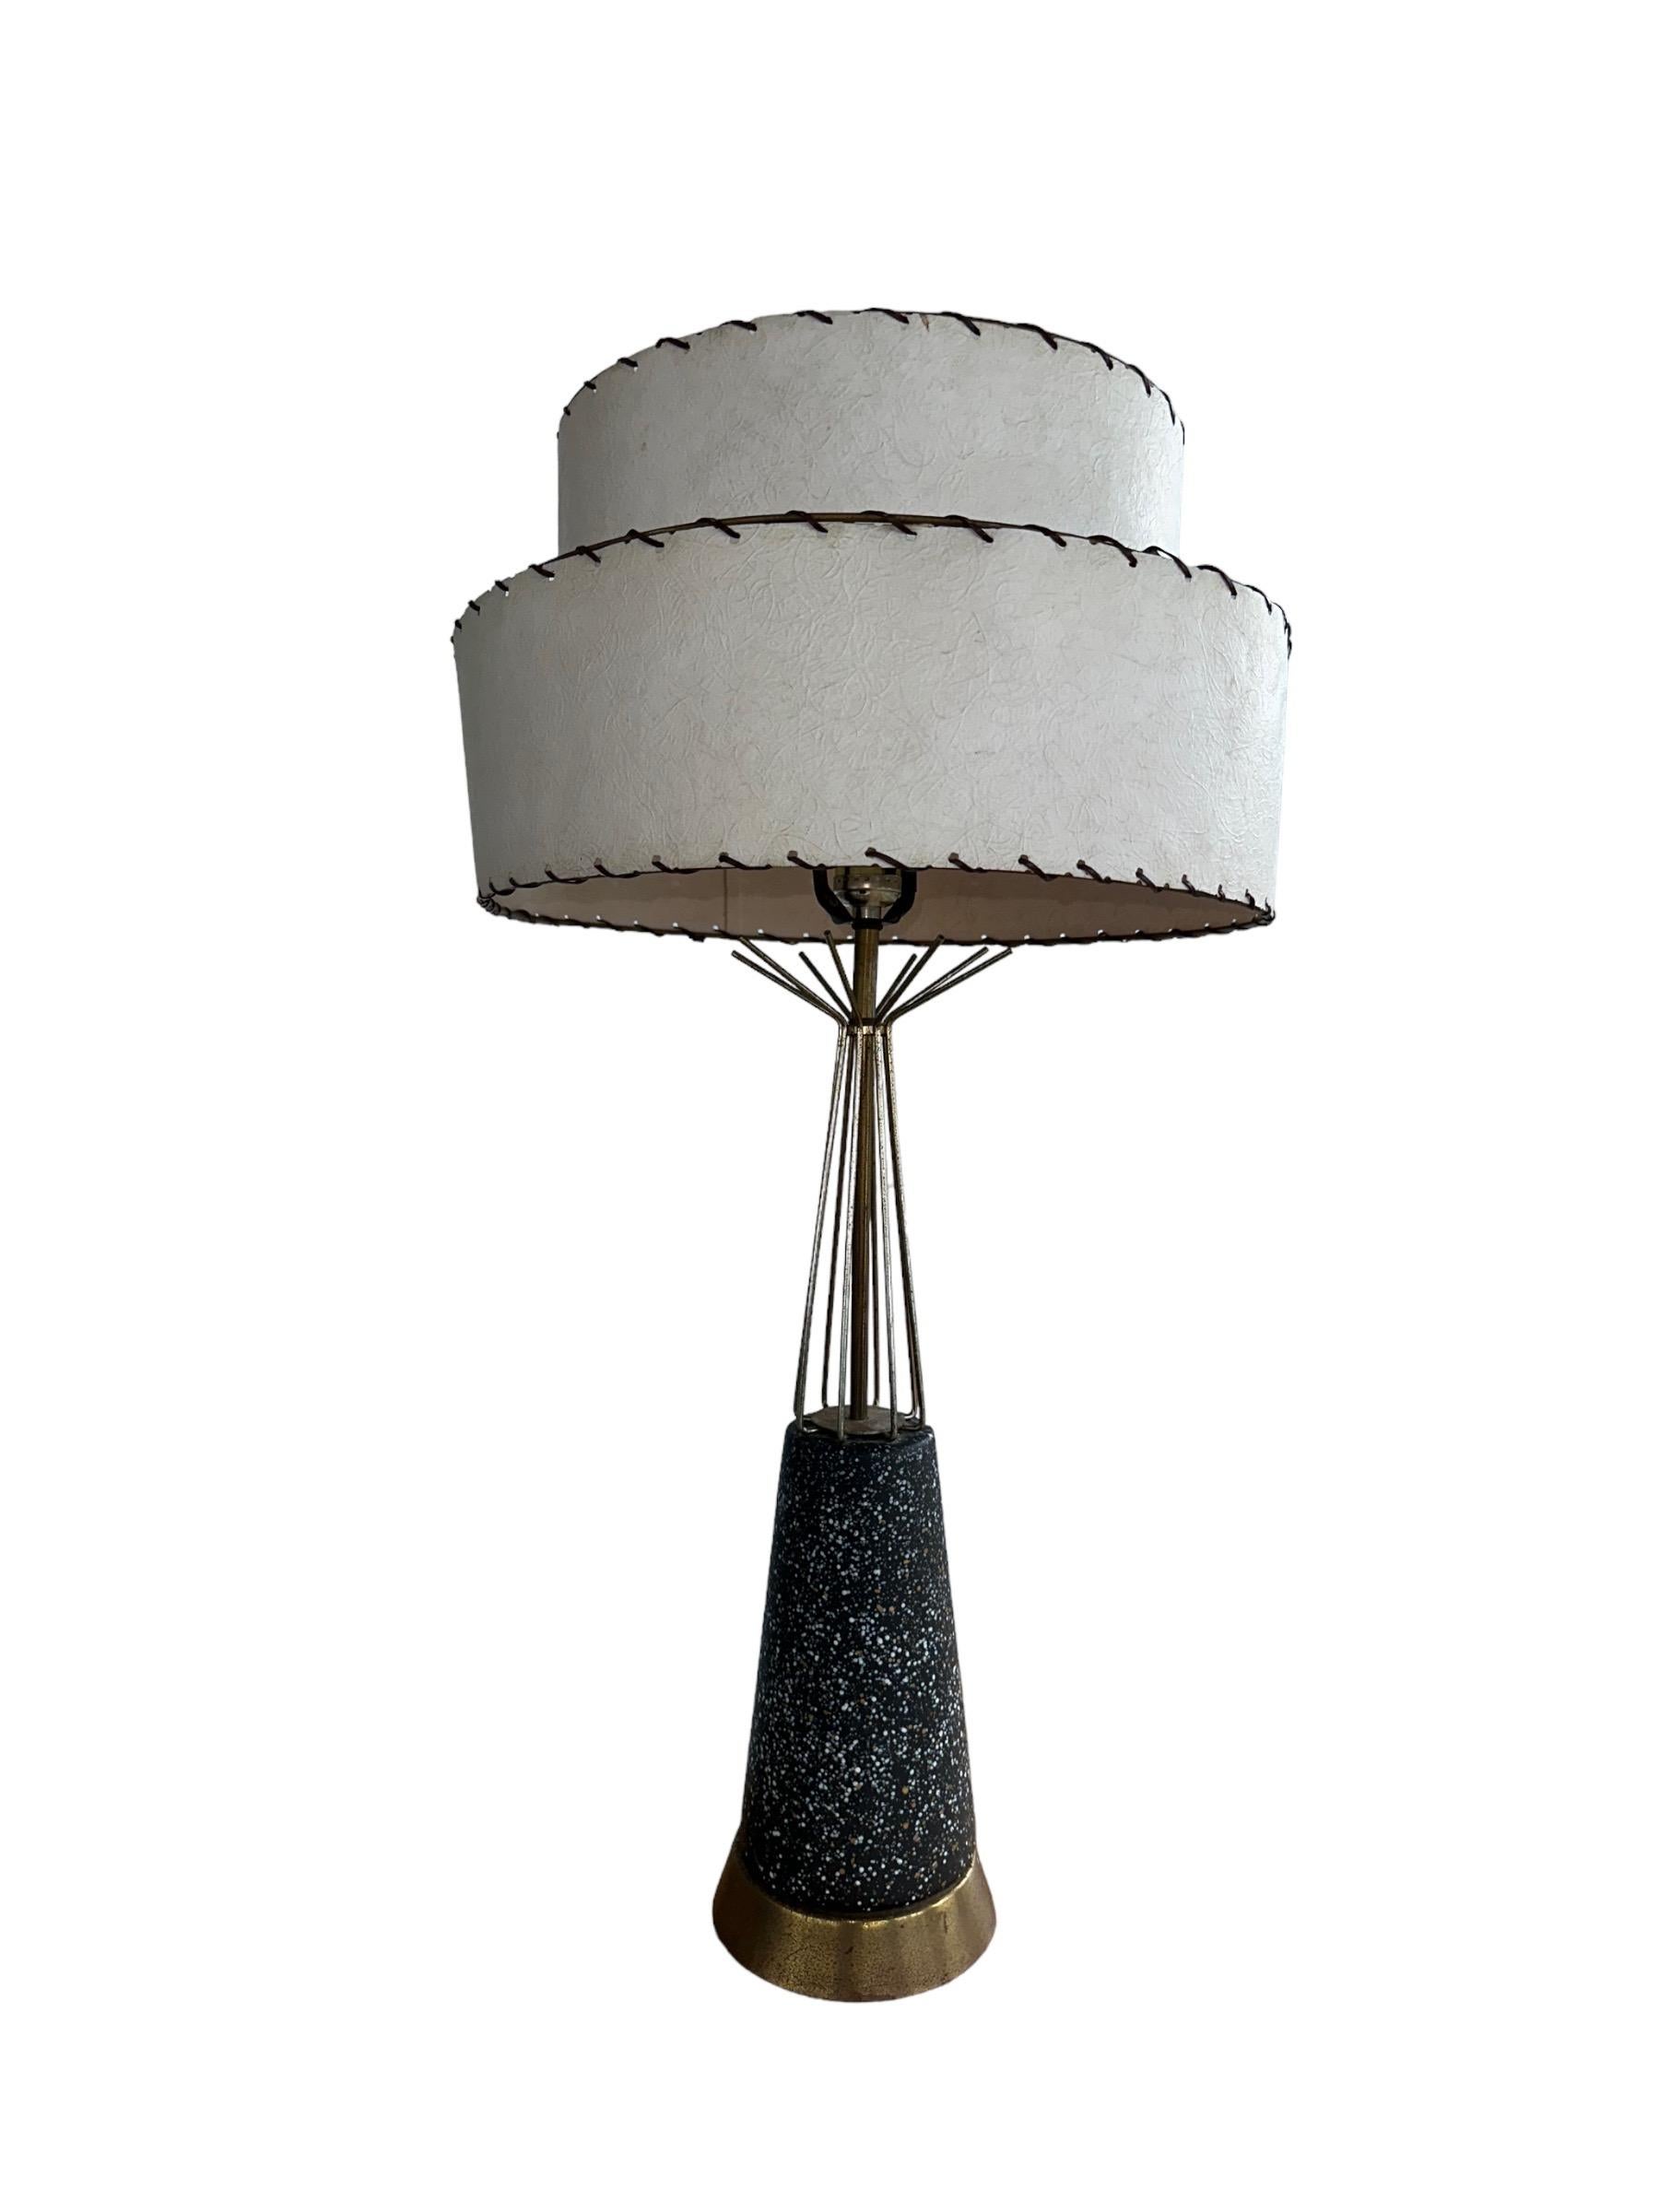 Unique and brilliant Mid-Century Modern tall table lamp. In very good even original vintage condition, and presents well. Hand painted speckled tapered base, brass, bent rod neck, and original two tiered fiberglass round shade. Beautiful on or off,